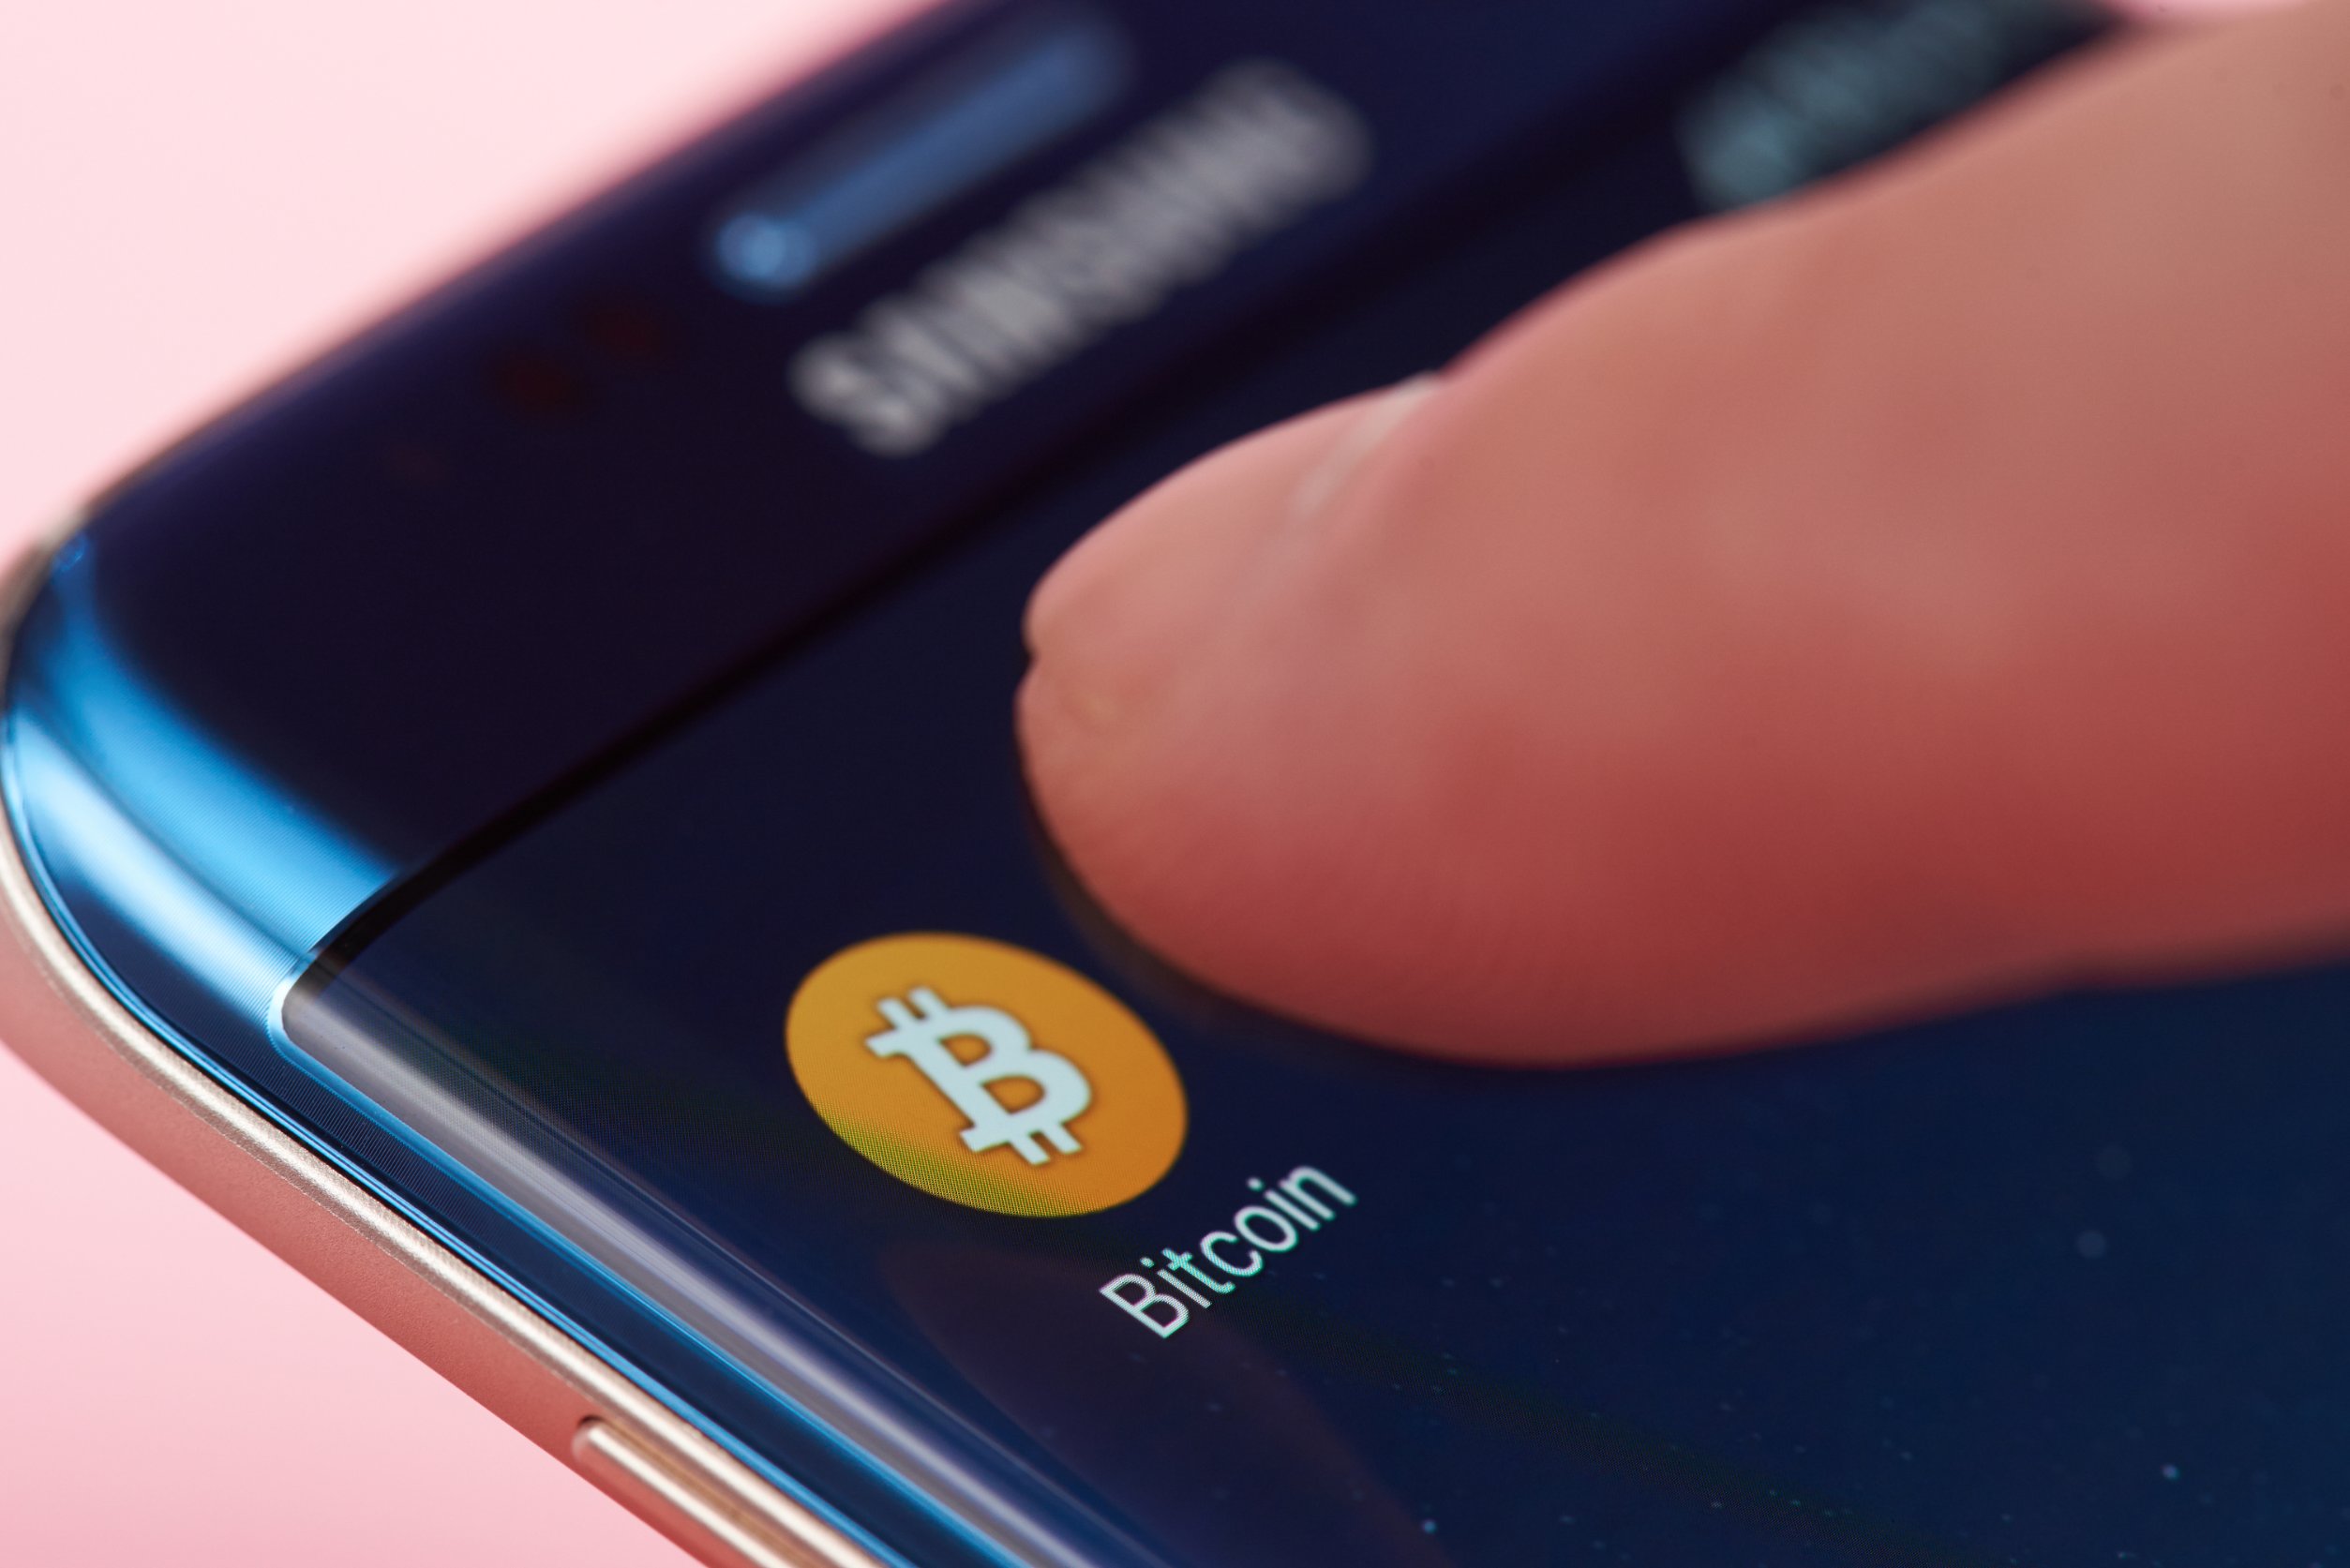 bitcoin application on mobile Law firm Vedder Price announces first Bitcoin ETF registered under the Securities Act